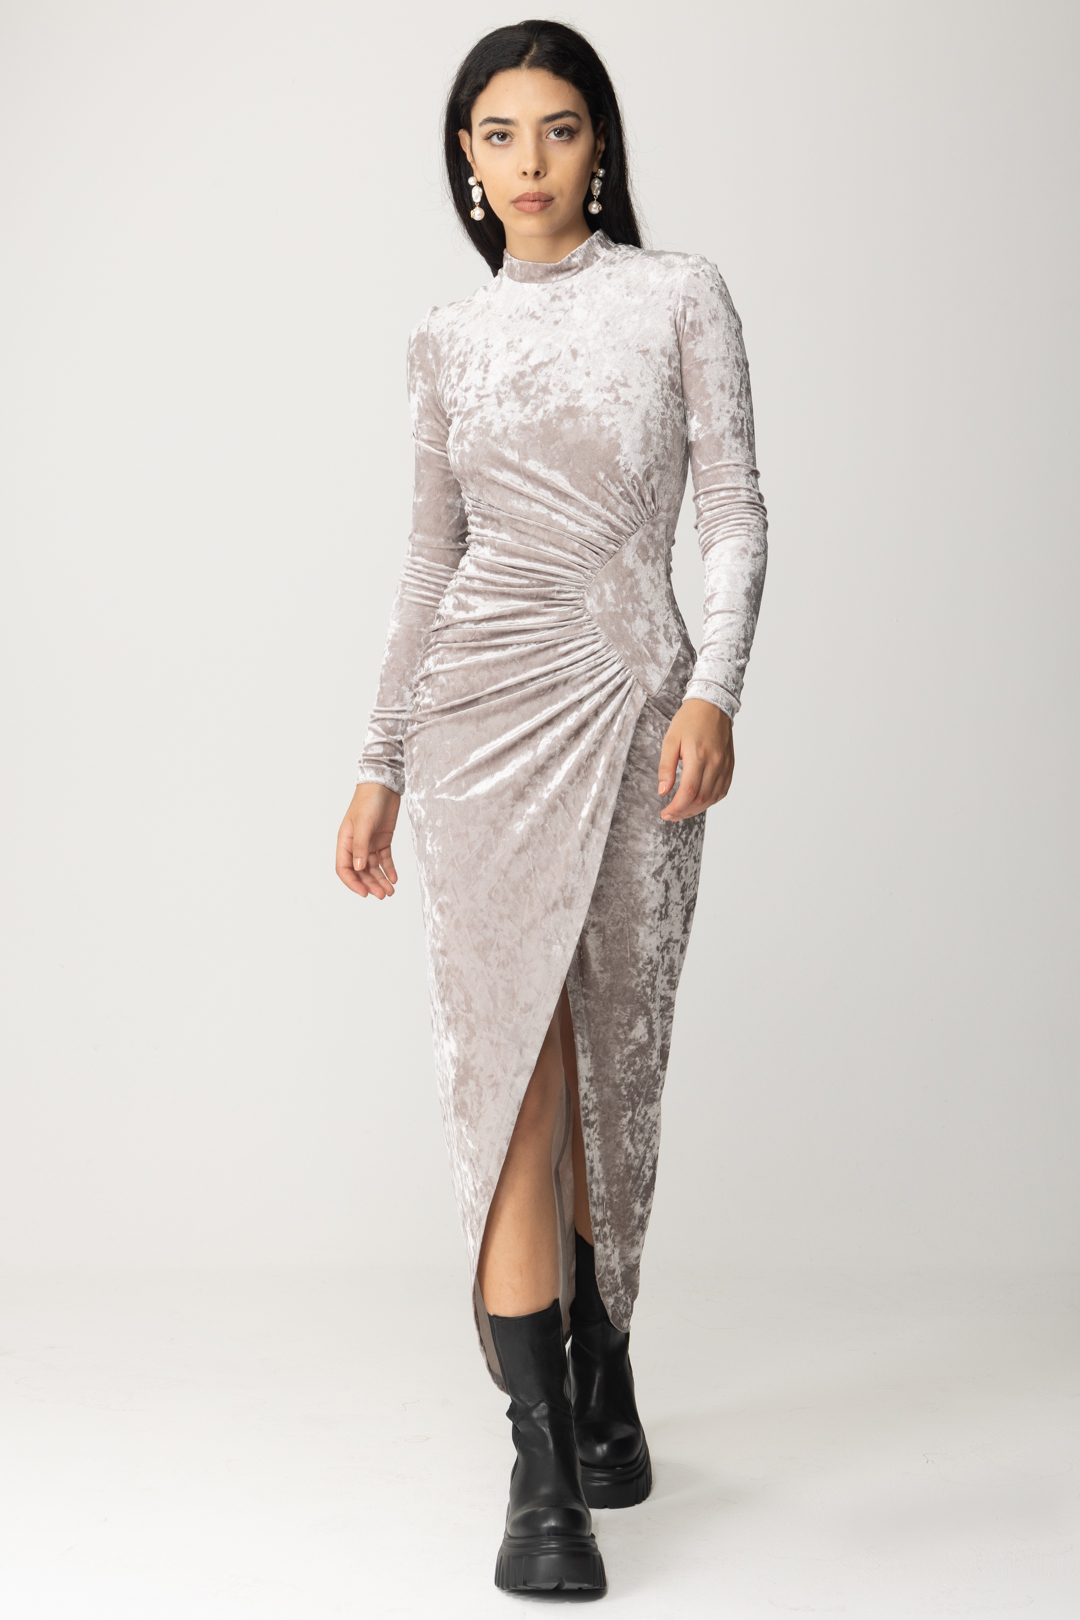 Preview: Aniye By Zoe chenille long dress with slit HOT GRAY